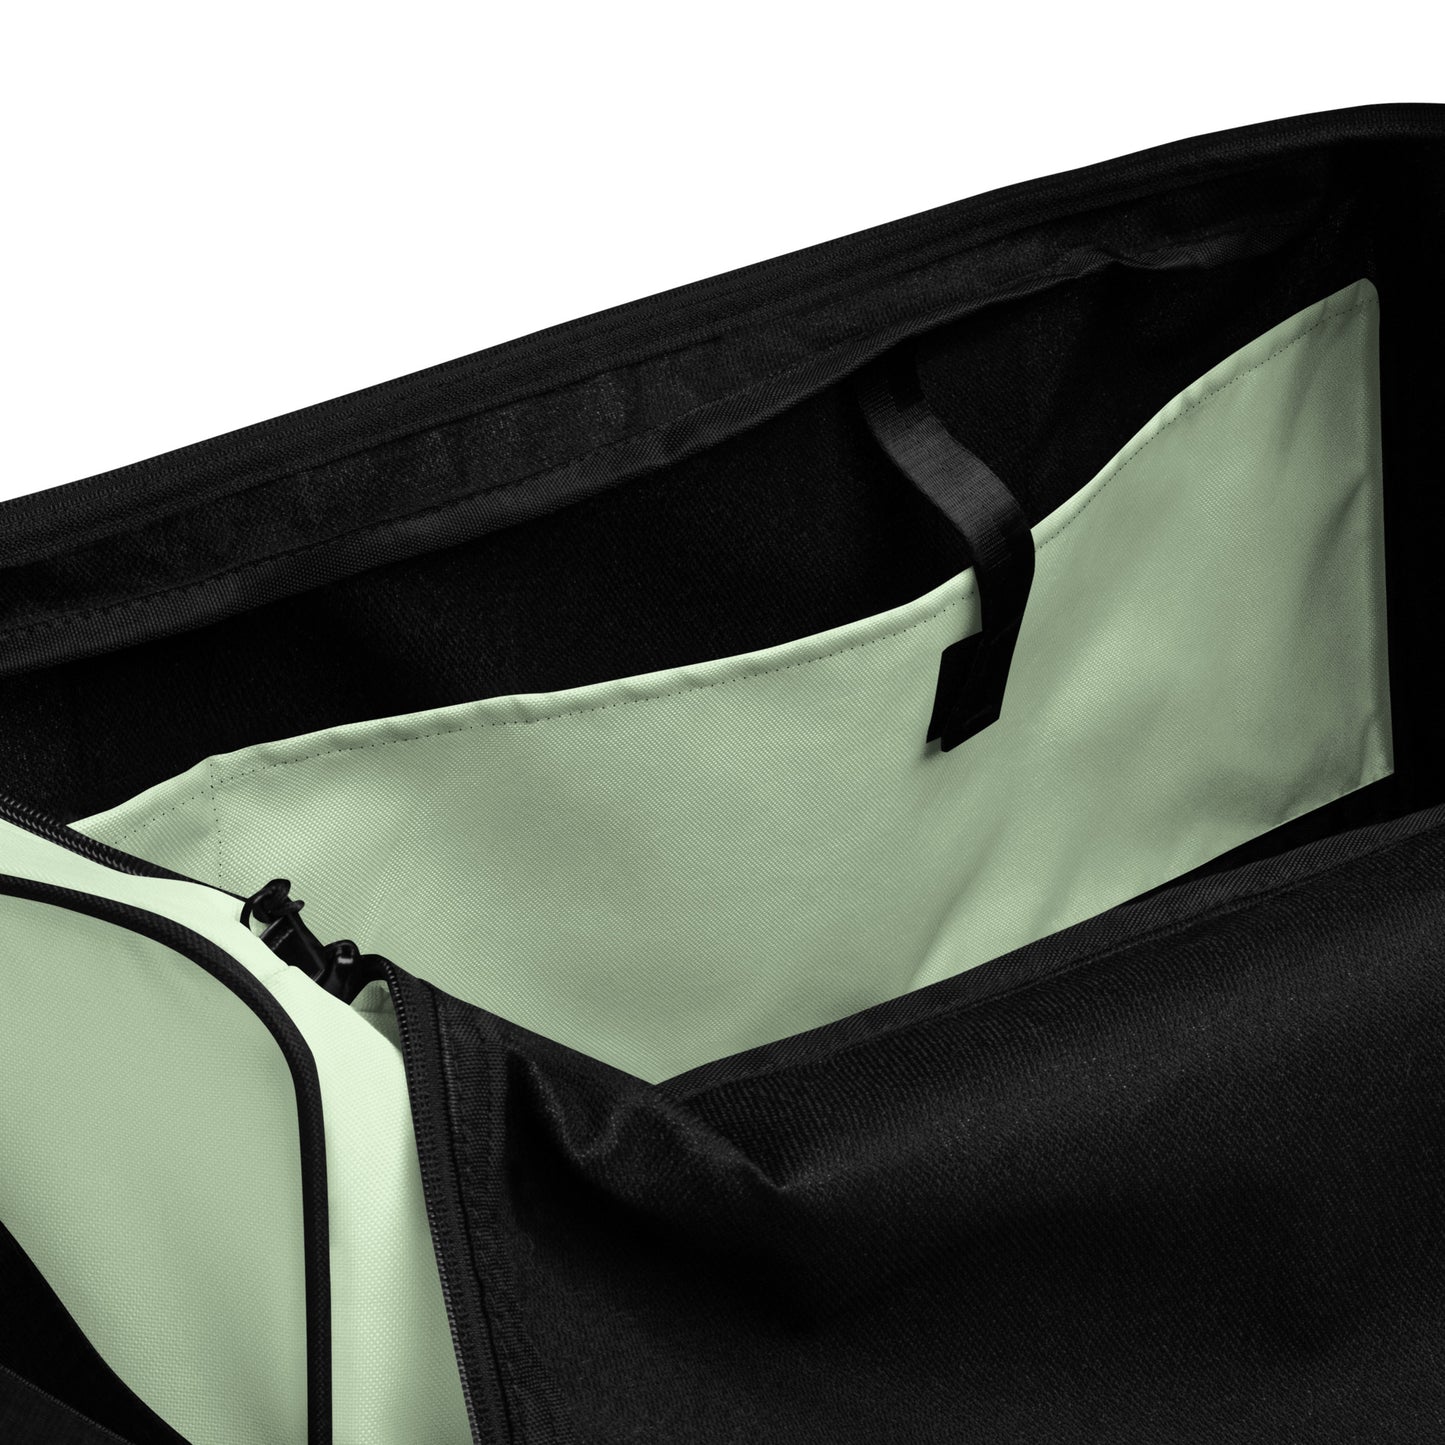 Cool Mint - Sustainably Made Duffle Bag